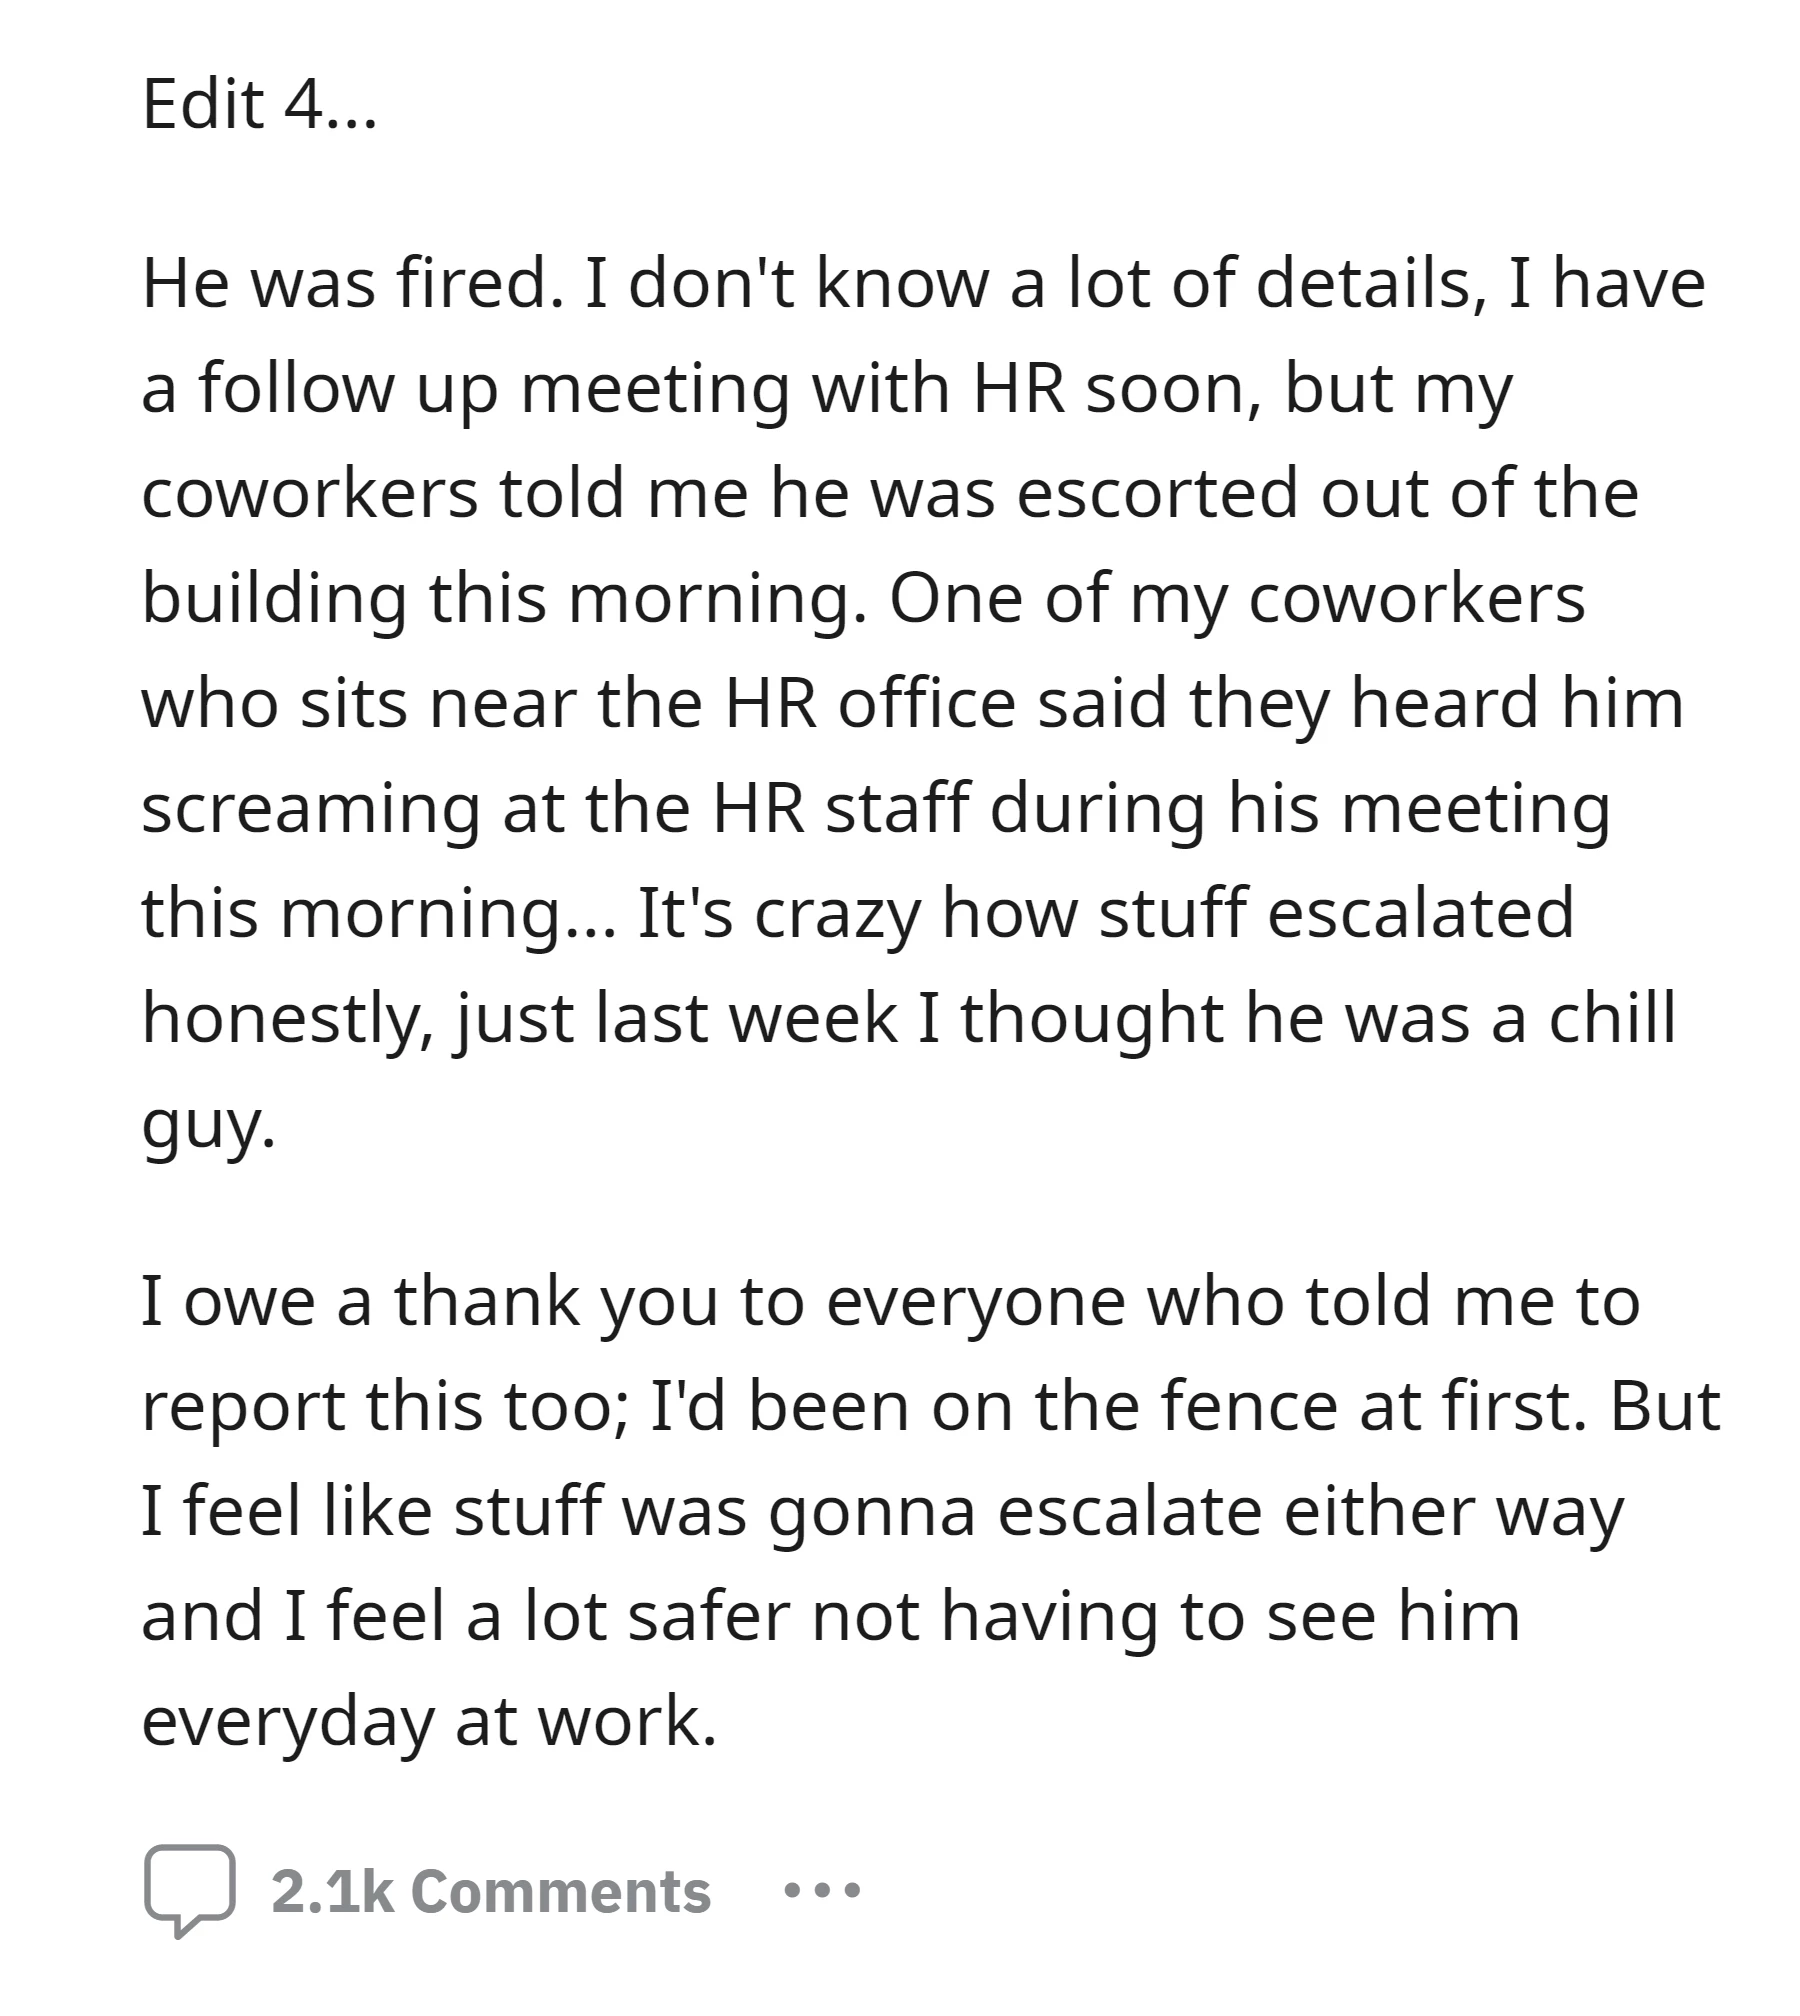 The coworker was fired